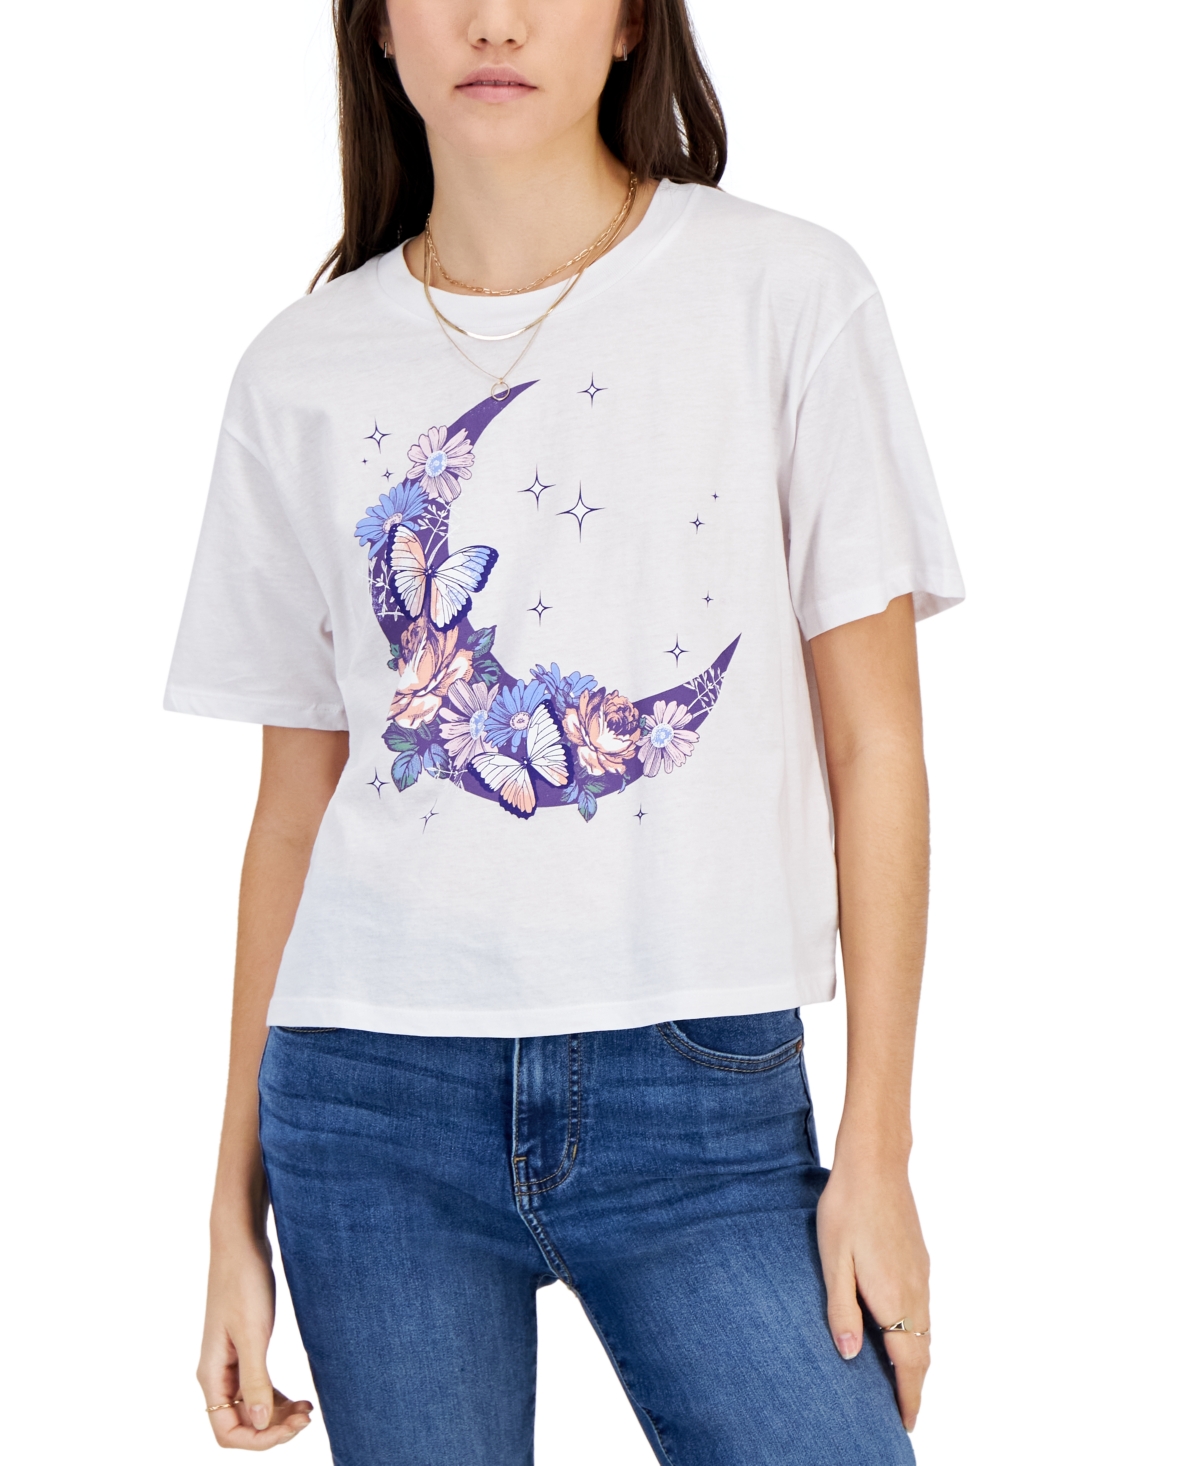 Juniors' Short-Sleeve Butterfly Moon Graphic T-Shirt - White